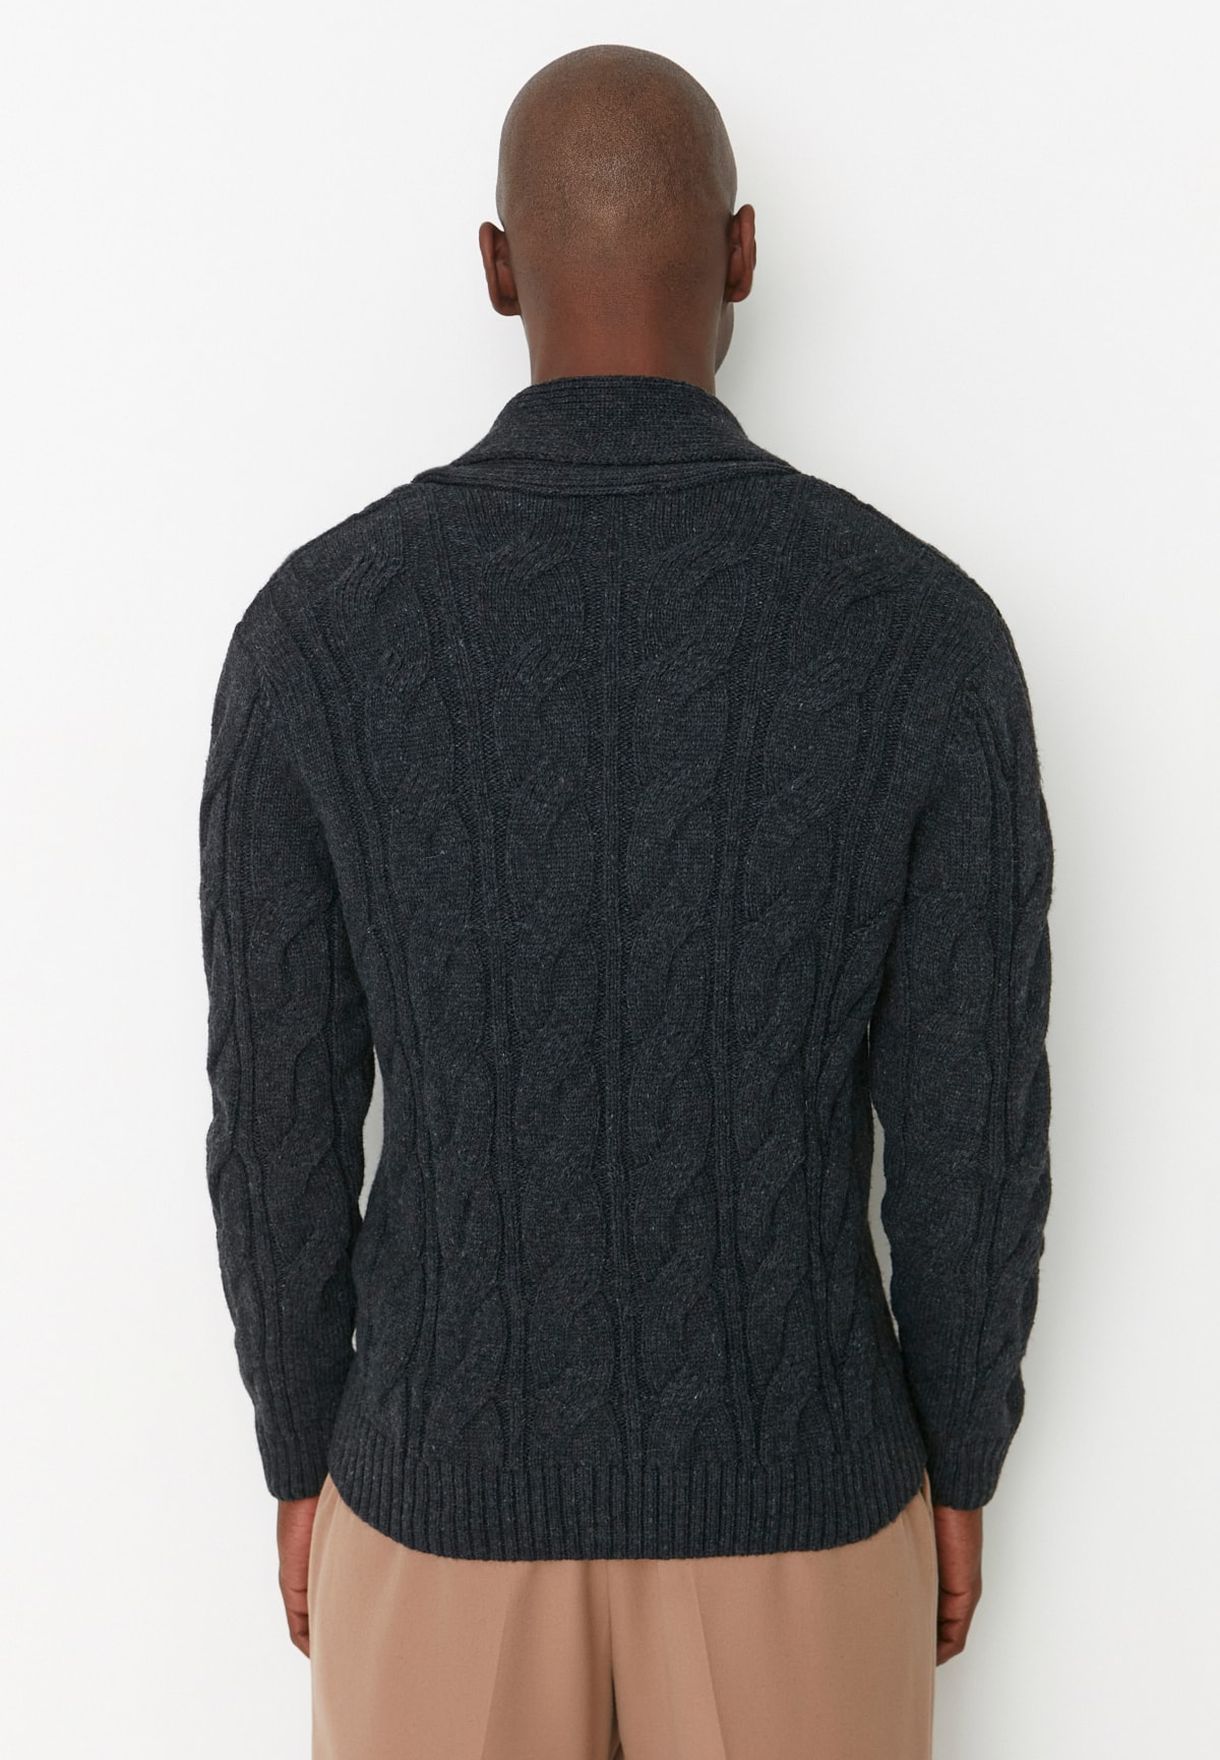 Cable Knit Shawl Neck Cardigan